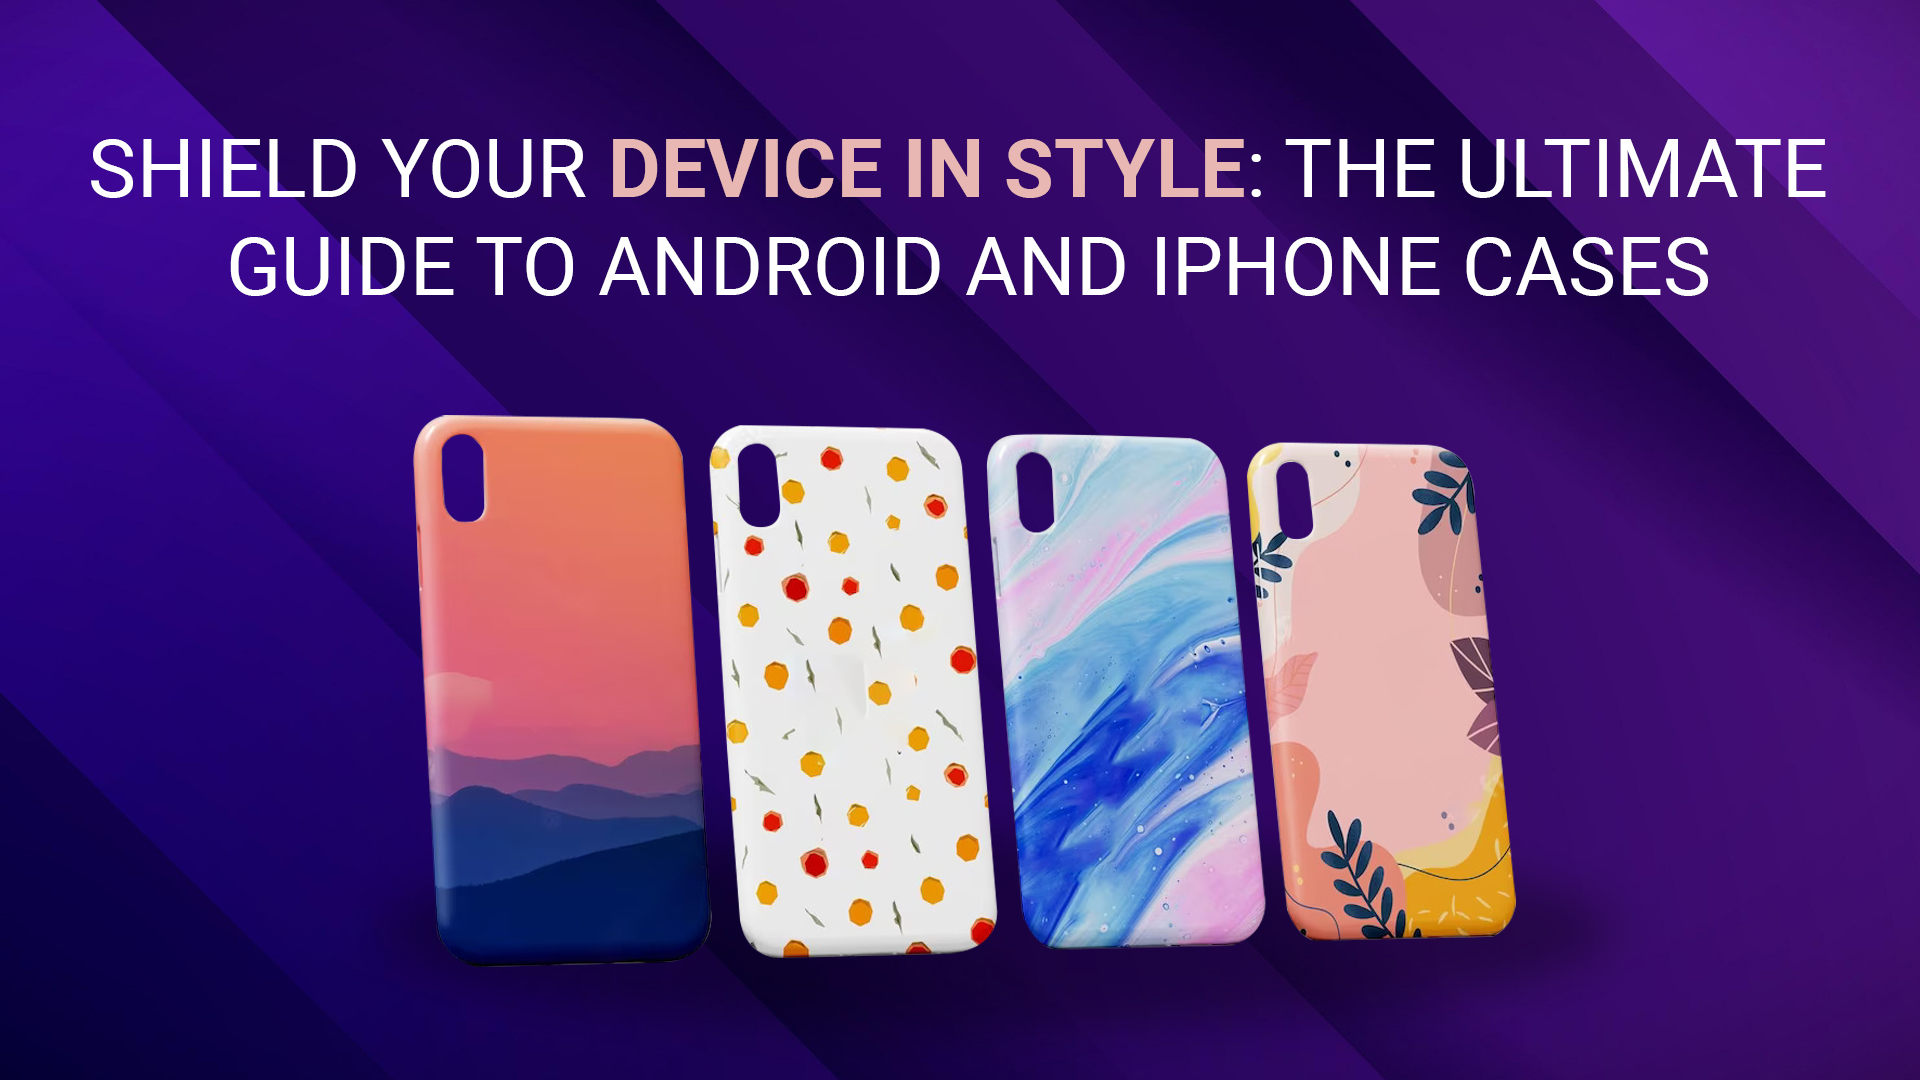 Shield Your Device in Style: The Ultimate Guide To Android and iPhone Cases